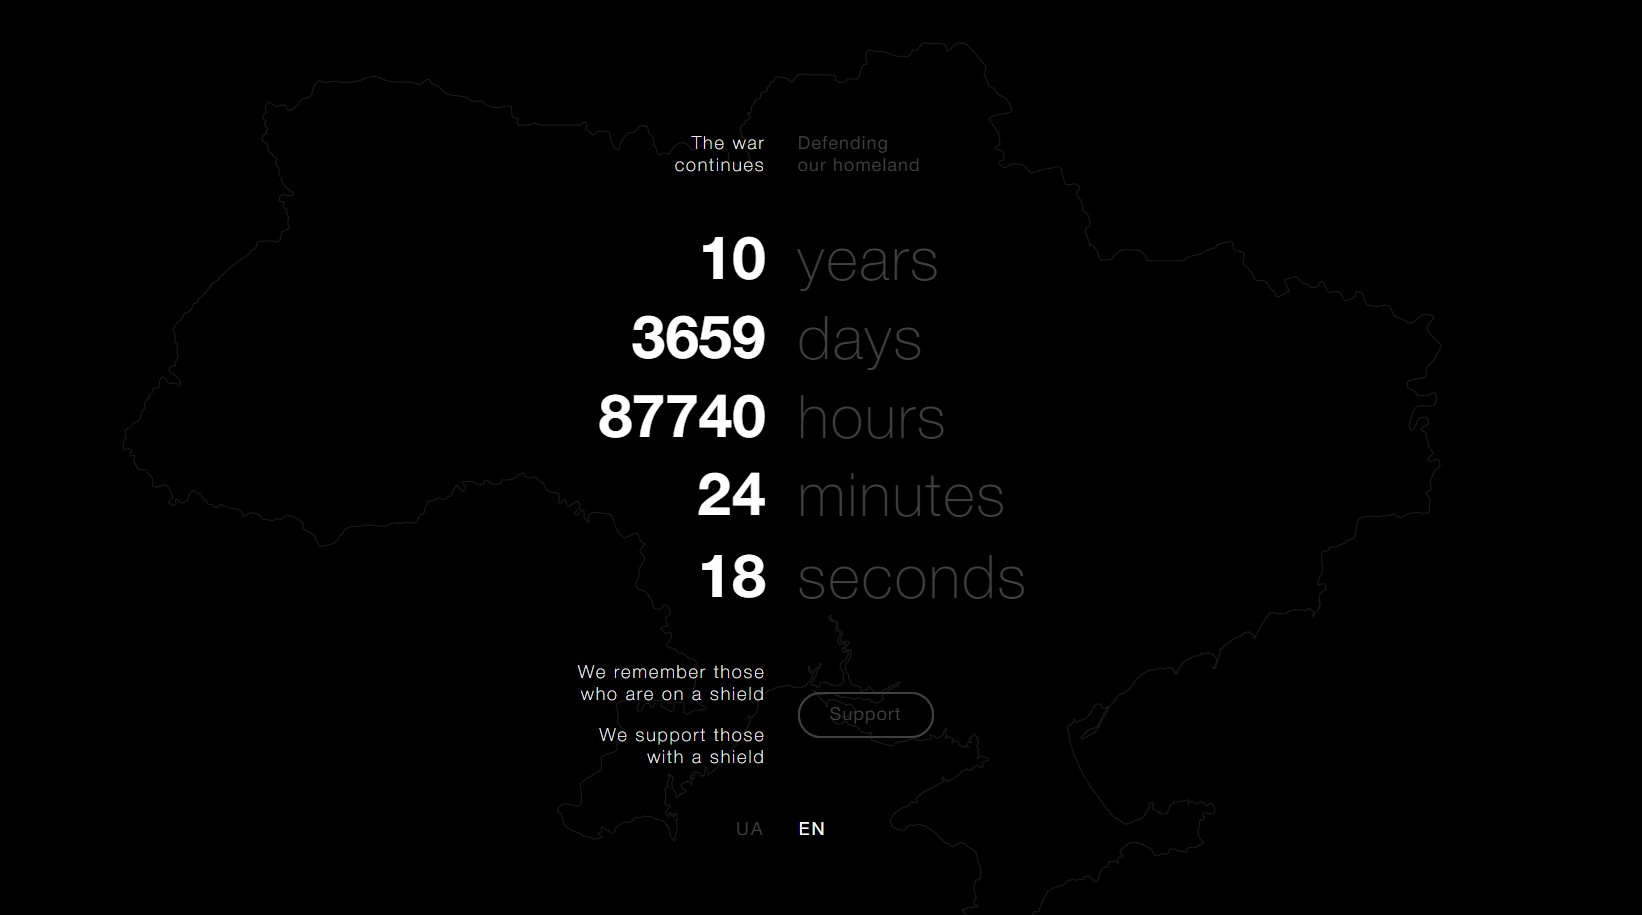 In Ukraine, a website chronographing the Russian-Ukrainian war has been launched